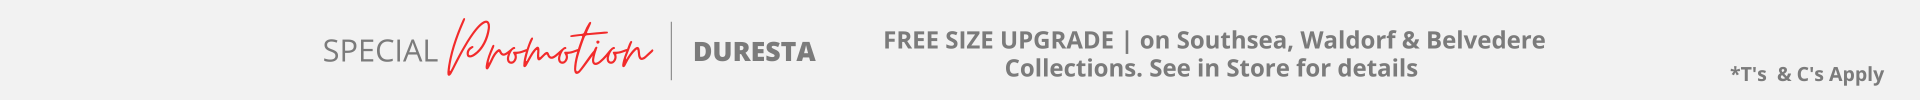 Duresta Southsea Free Size Upgrade Collections Banner 